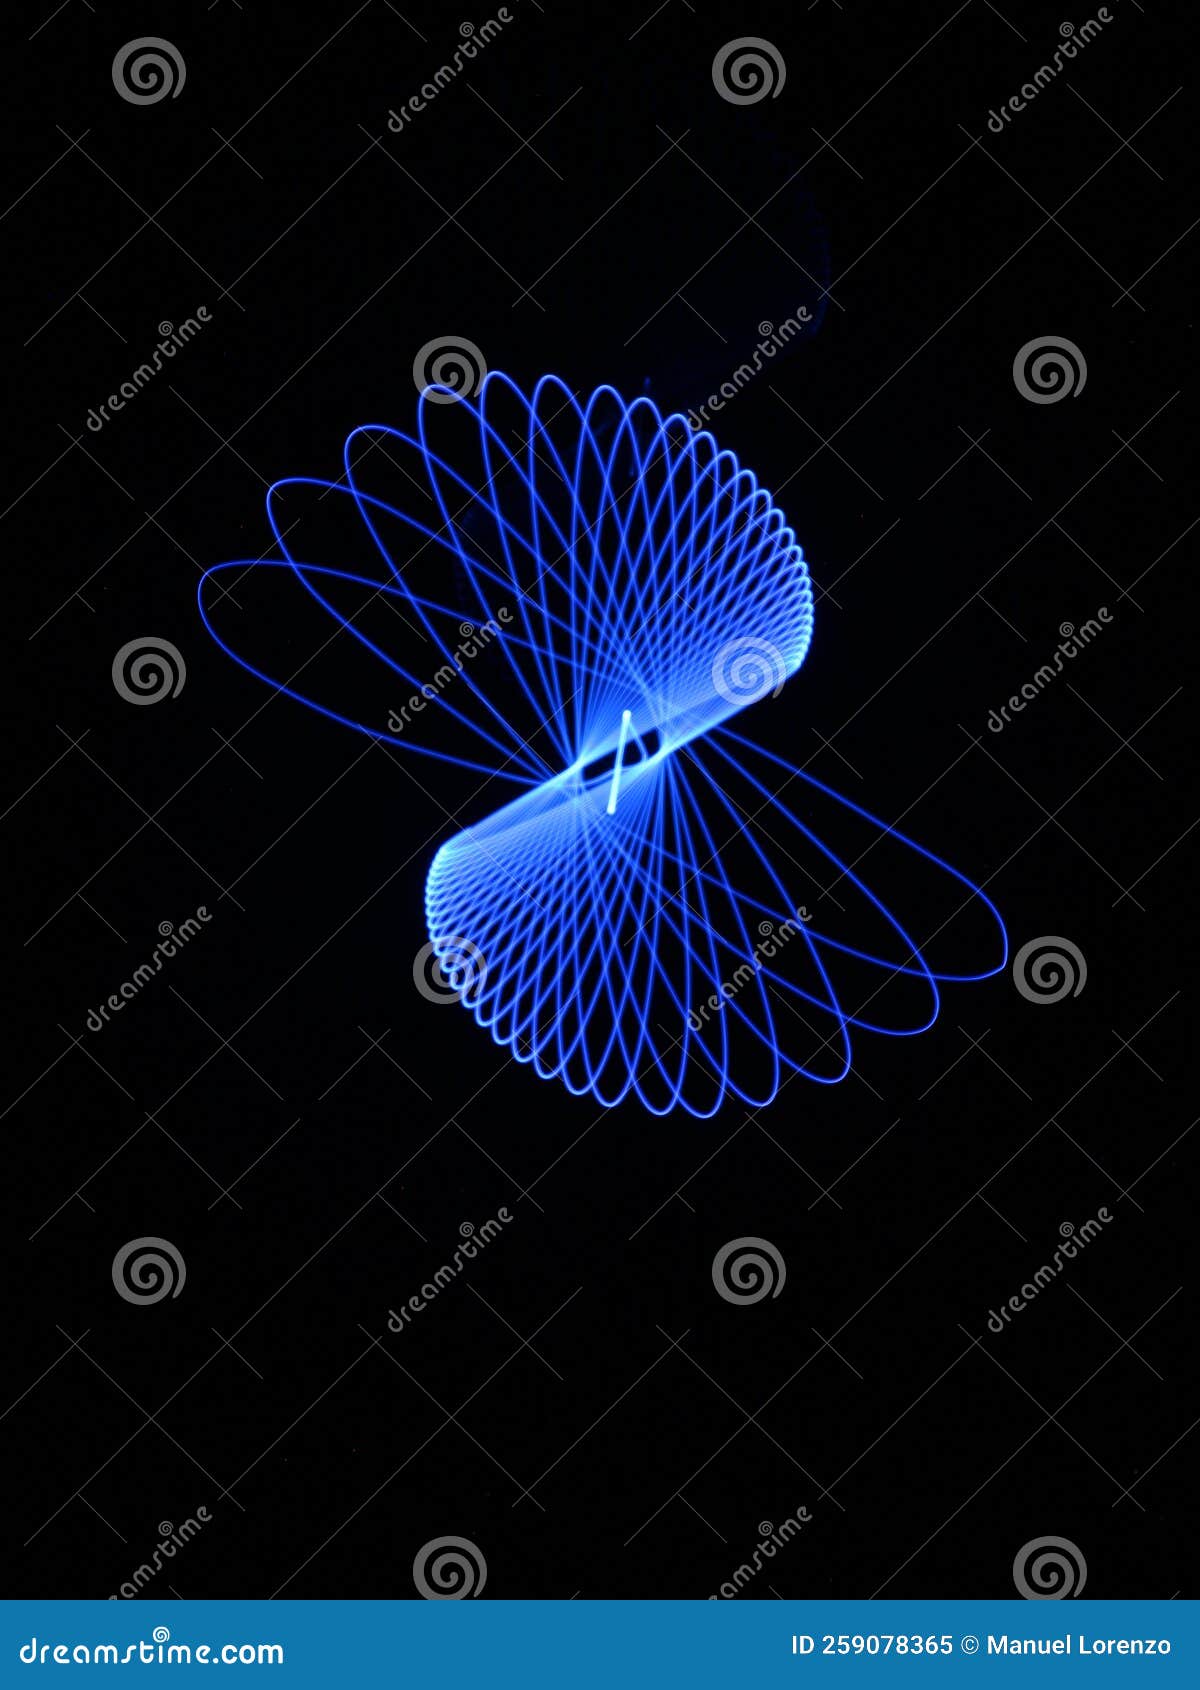 light abstract forms symmetrical round different colors